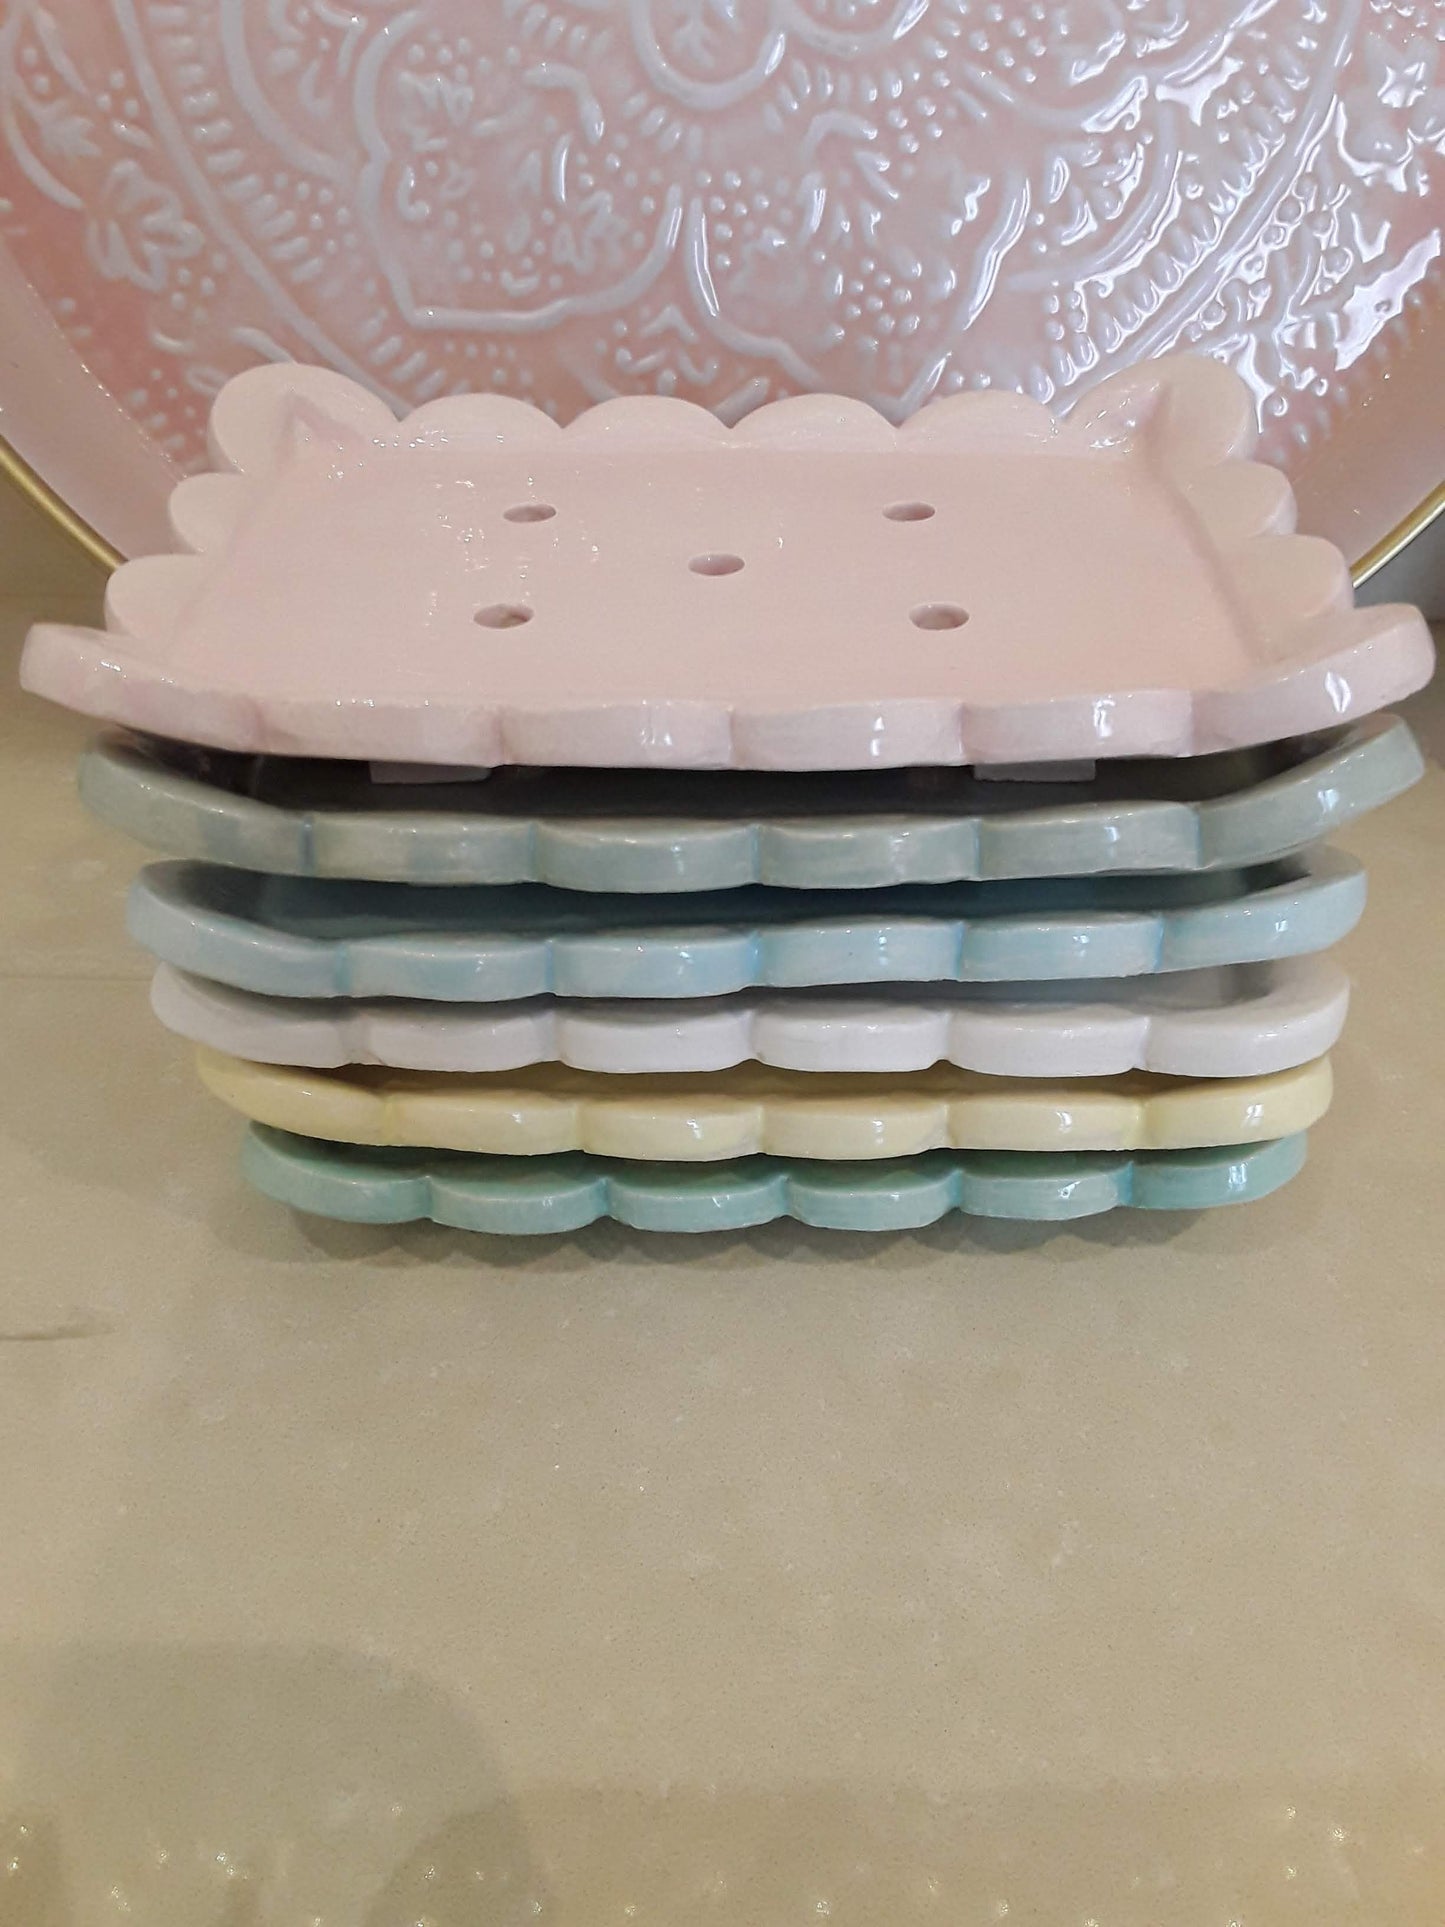 Scalloped soap dishes